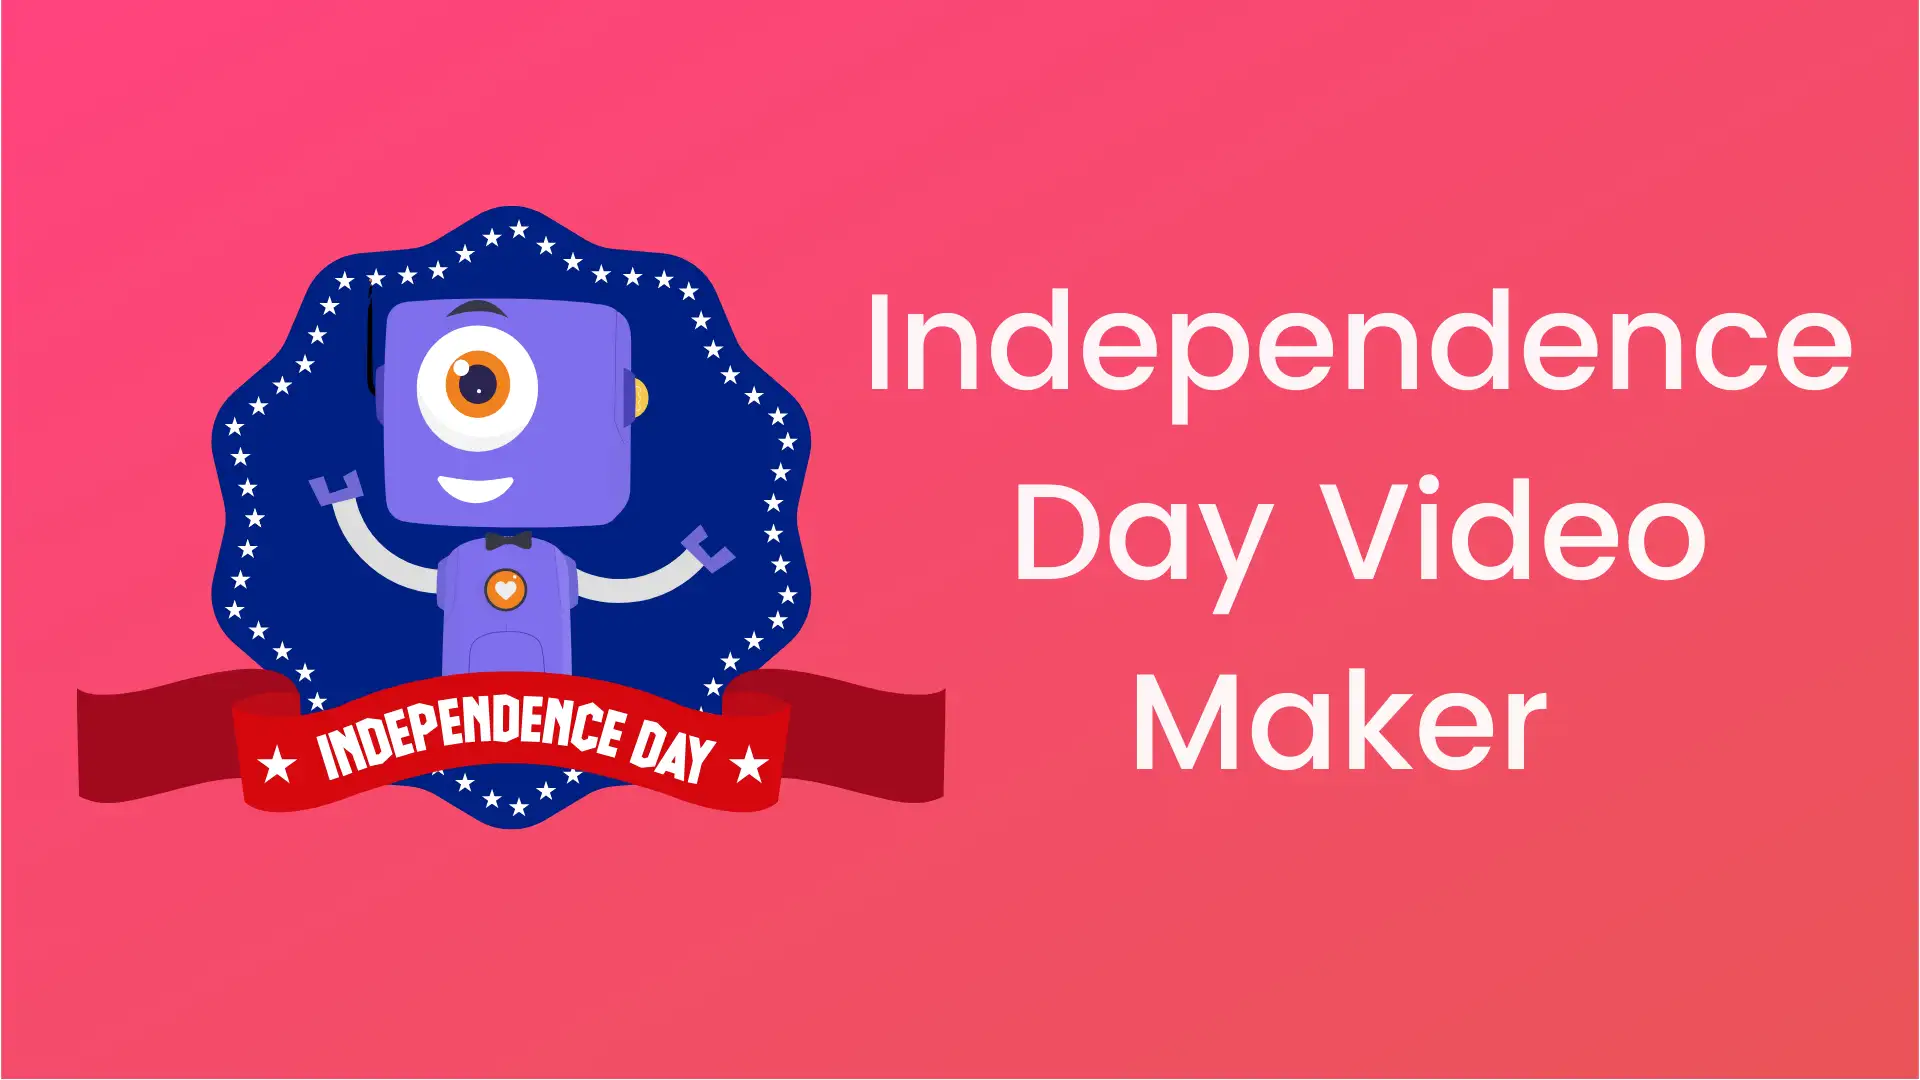 Independence day video maker